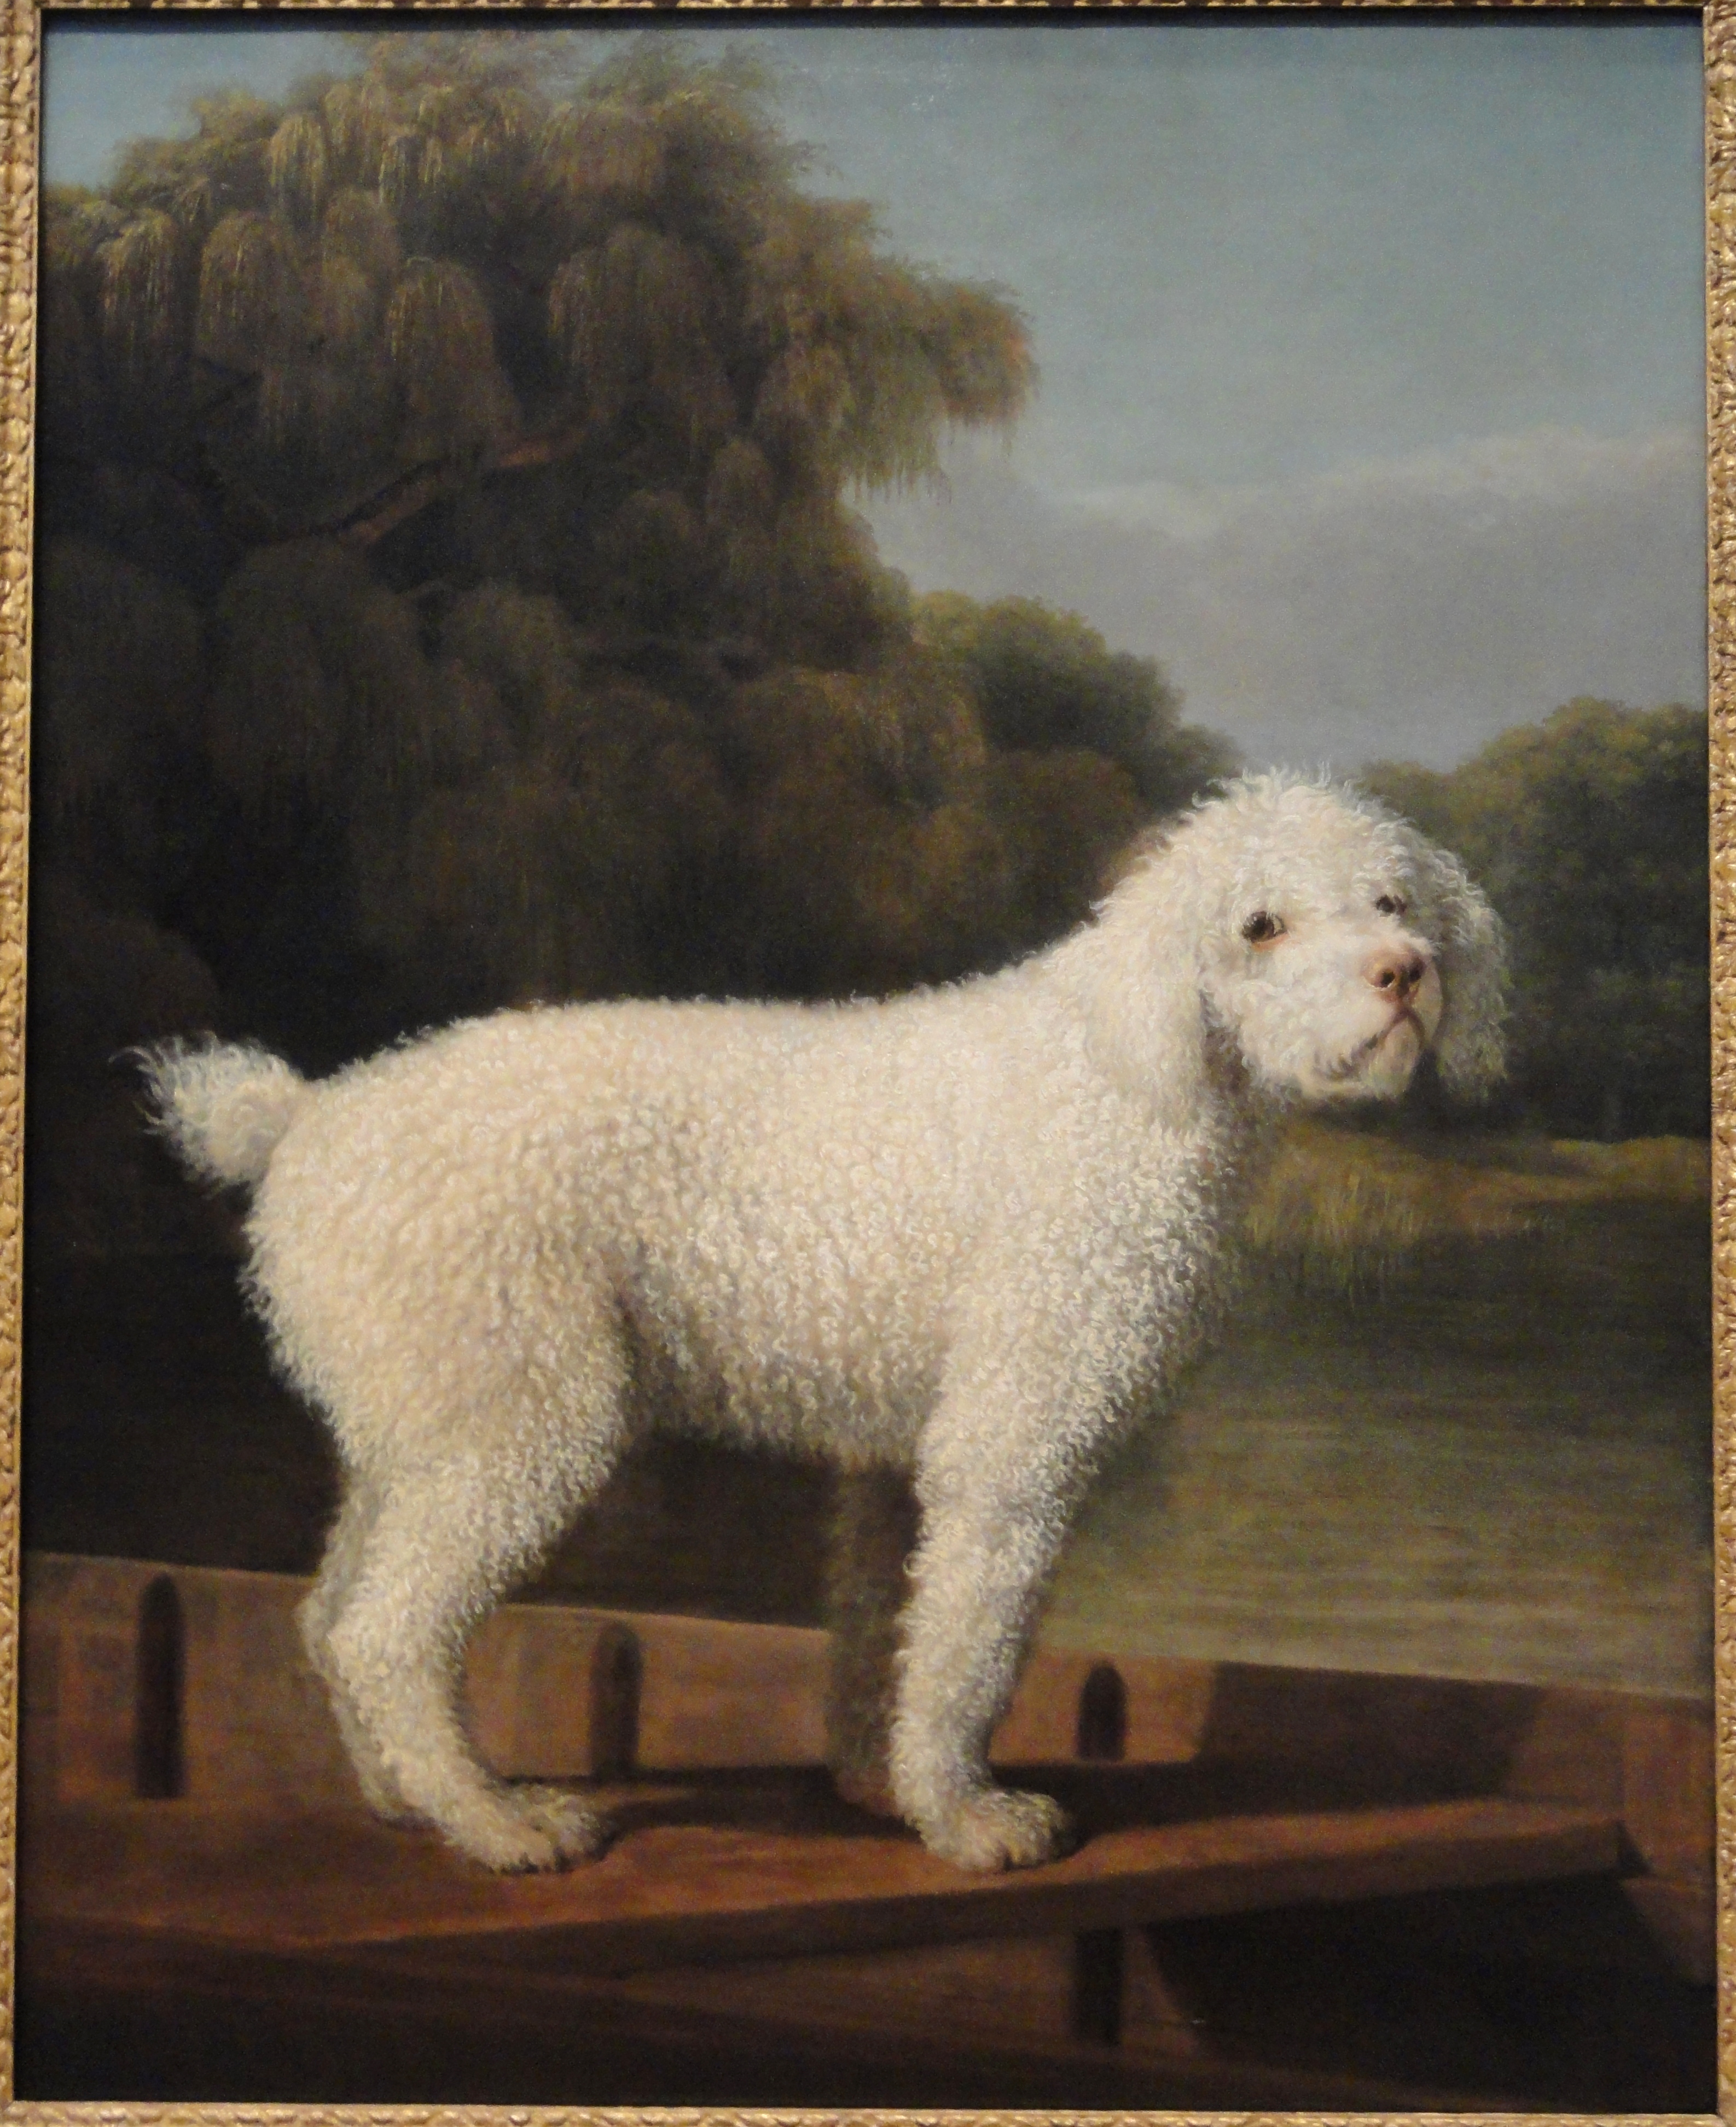 pictures of white poodles